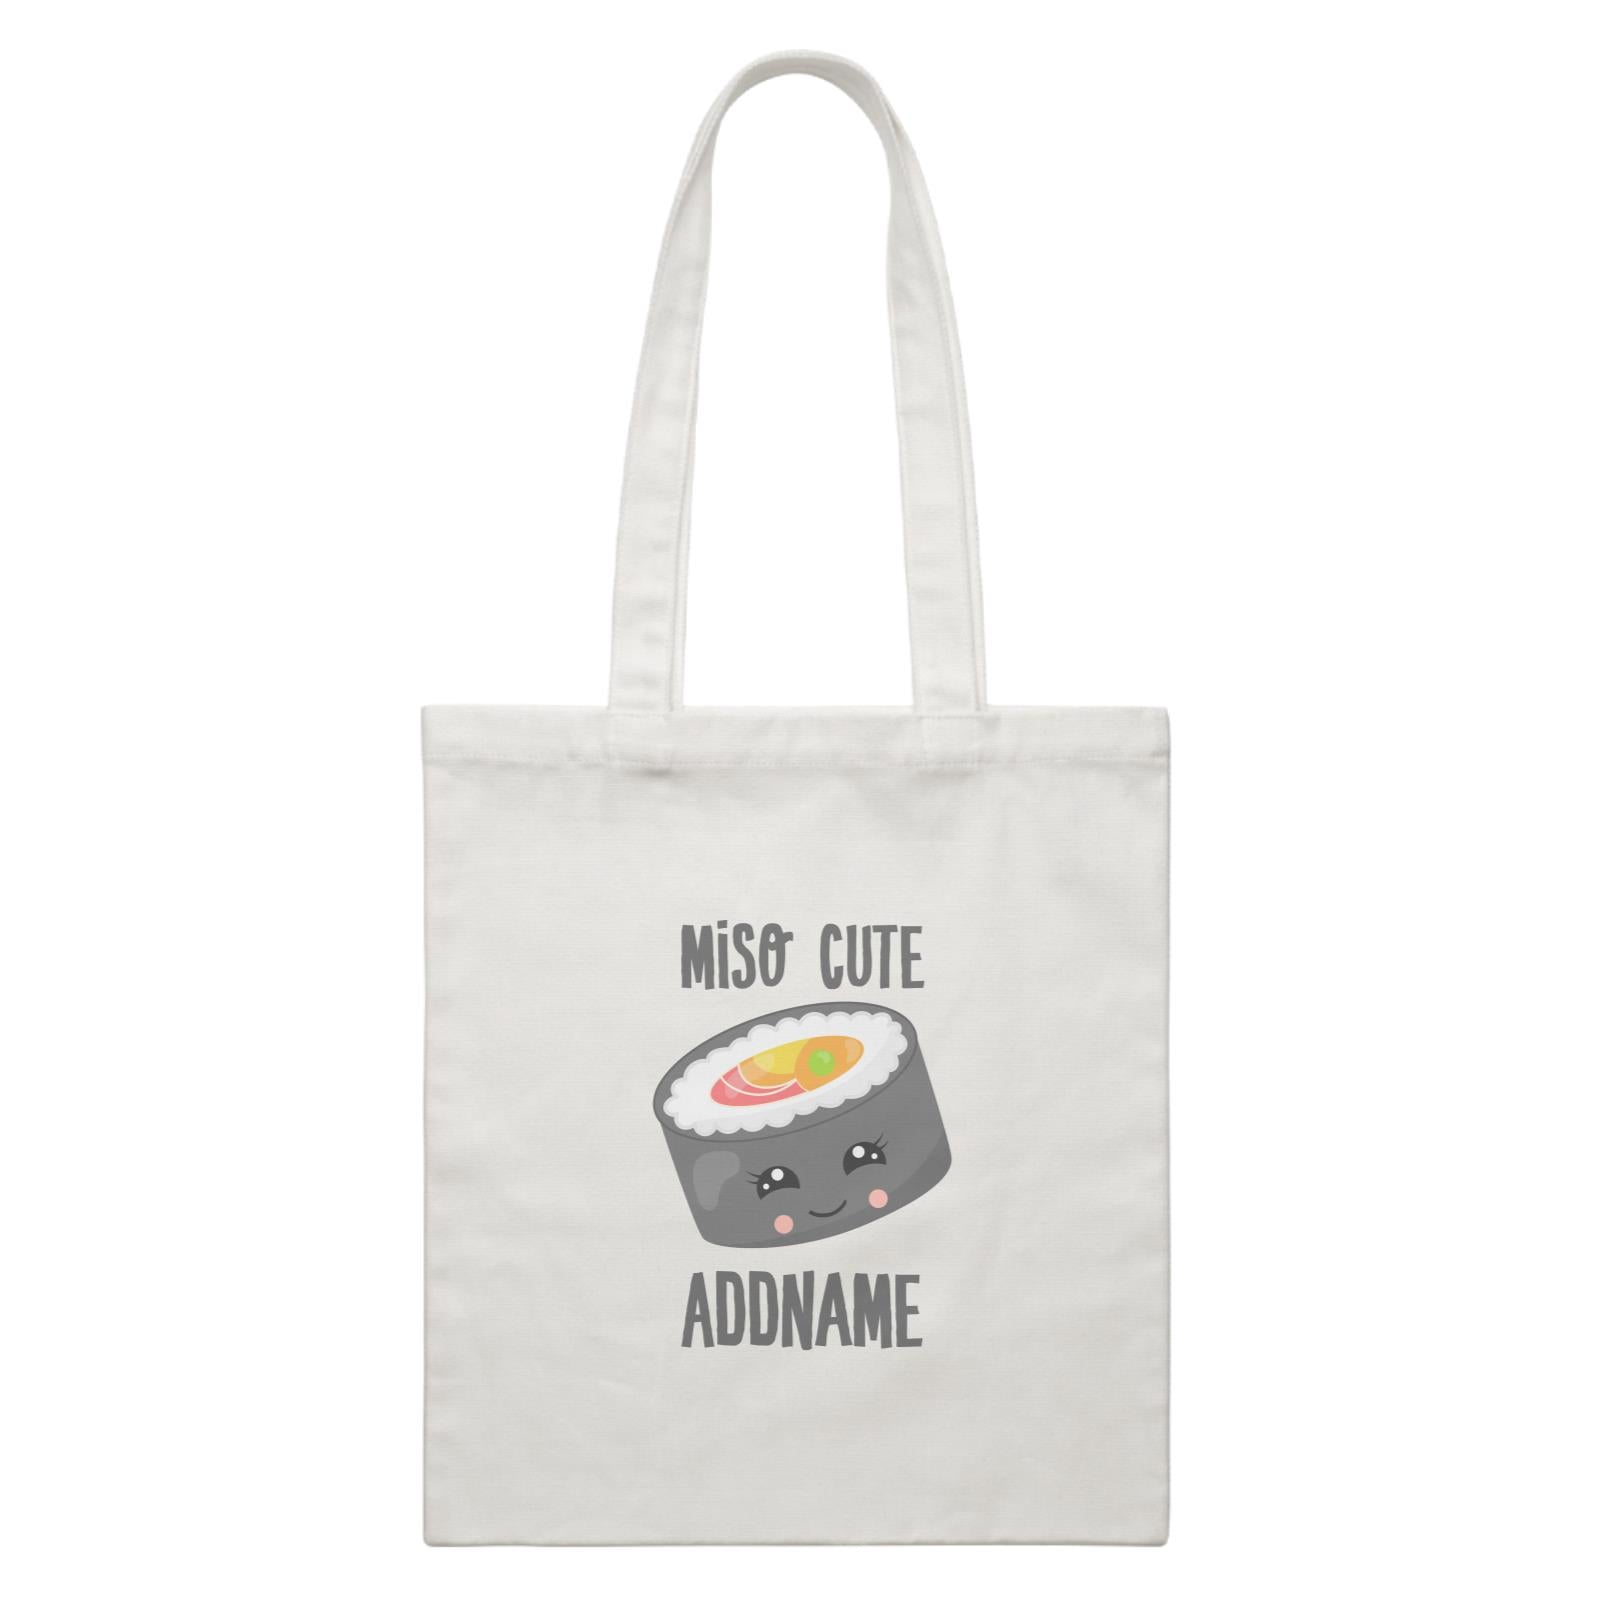 Miso Cute Sushi Circle Roll Addname White Canvas Bag